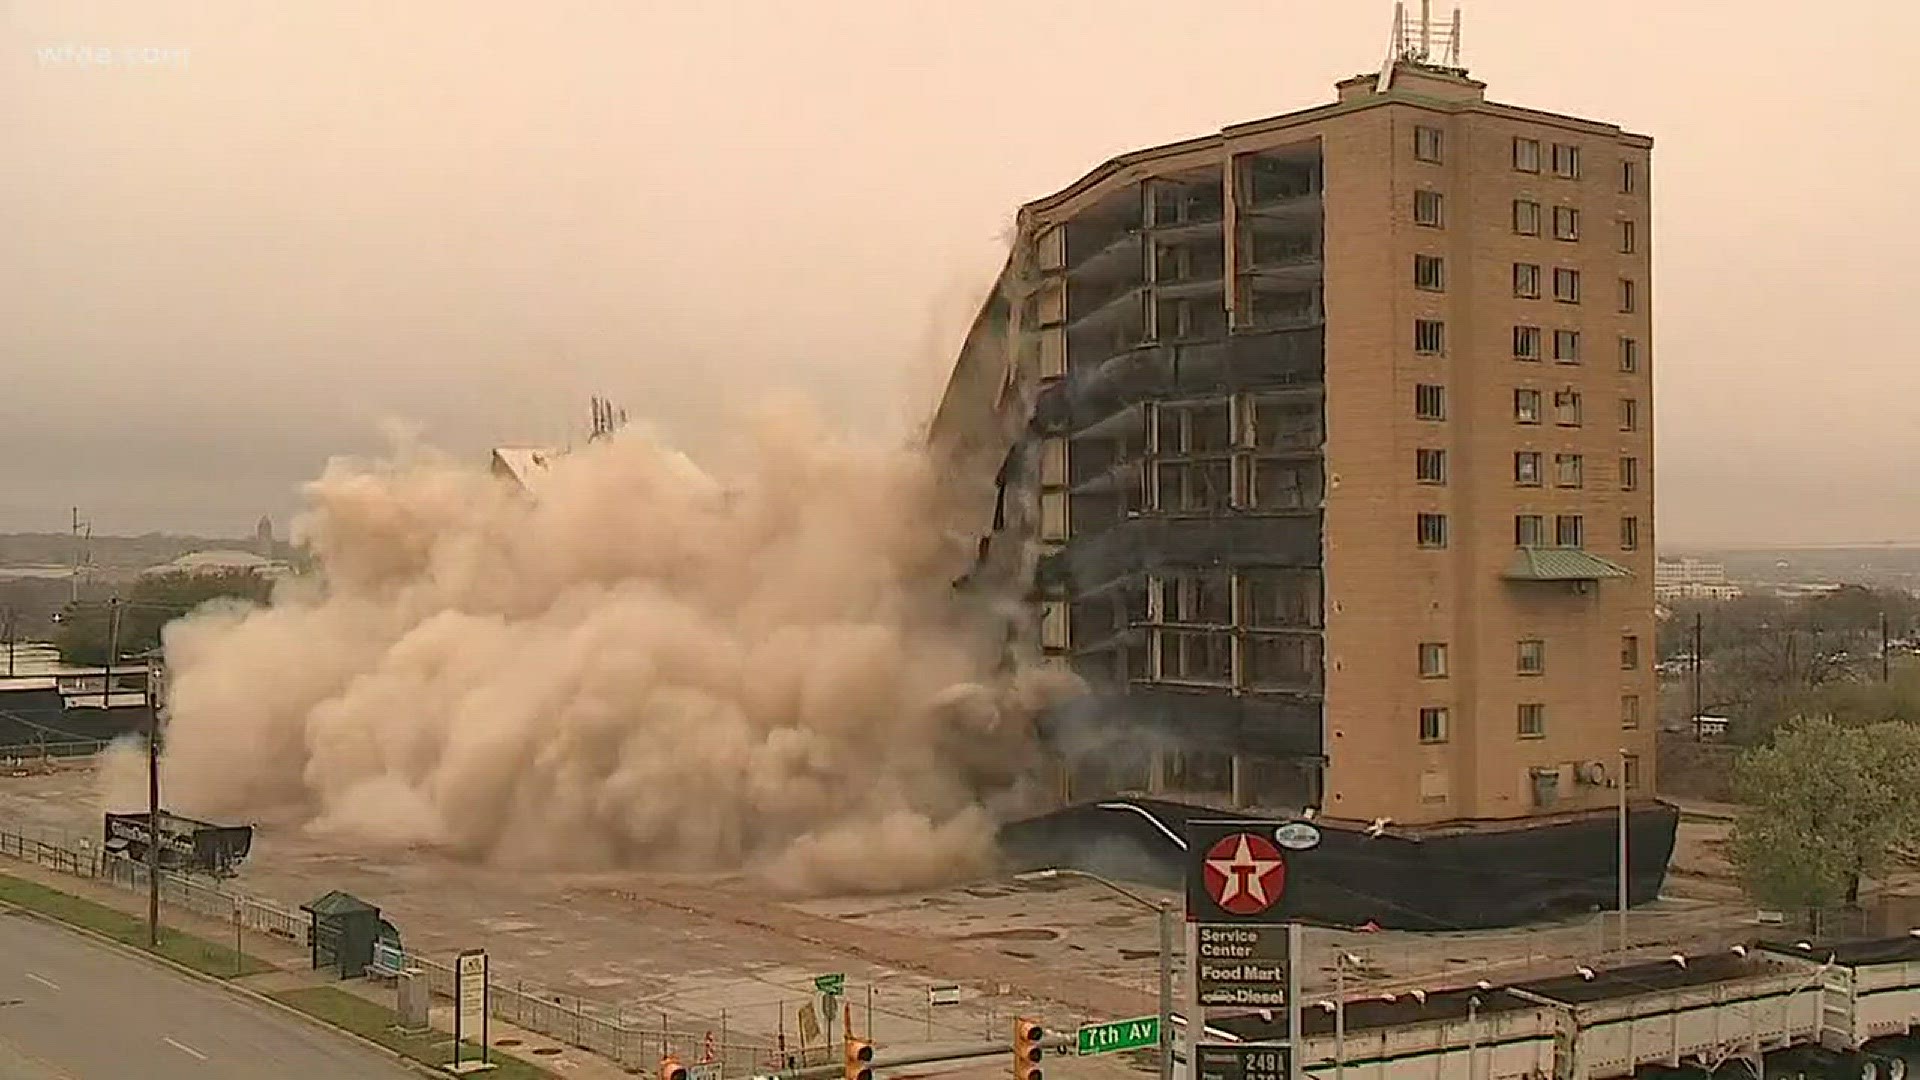 The 12-story Westchester Plaza building in Fort Worth is nothing more than a big pile of rubble. The building was imploded Sunday morning at 8 a.m. The building first opened in the 1950s as luxury apartments. Over the past 20 years, the Westchester buildi